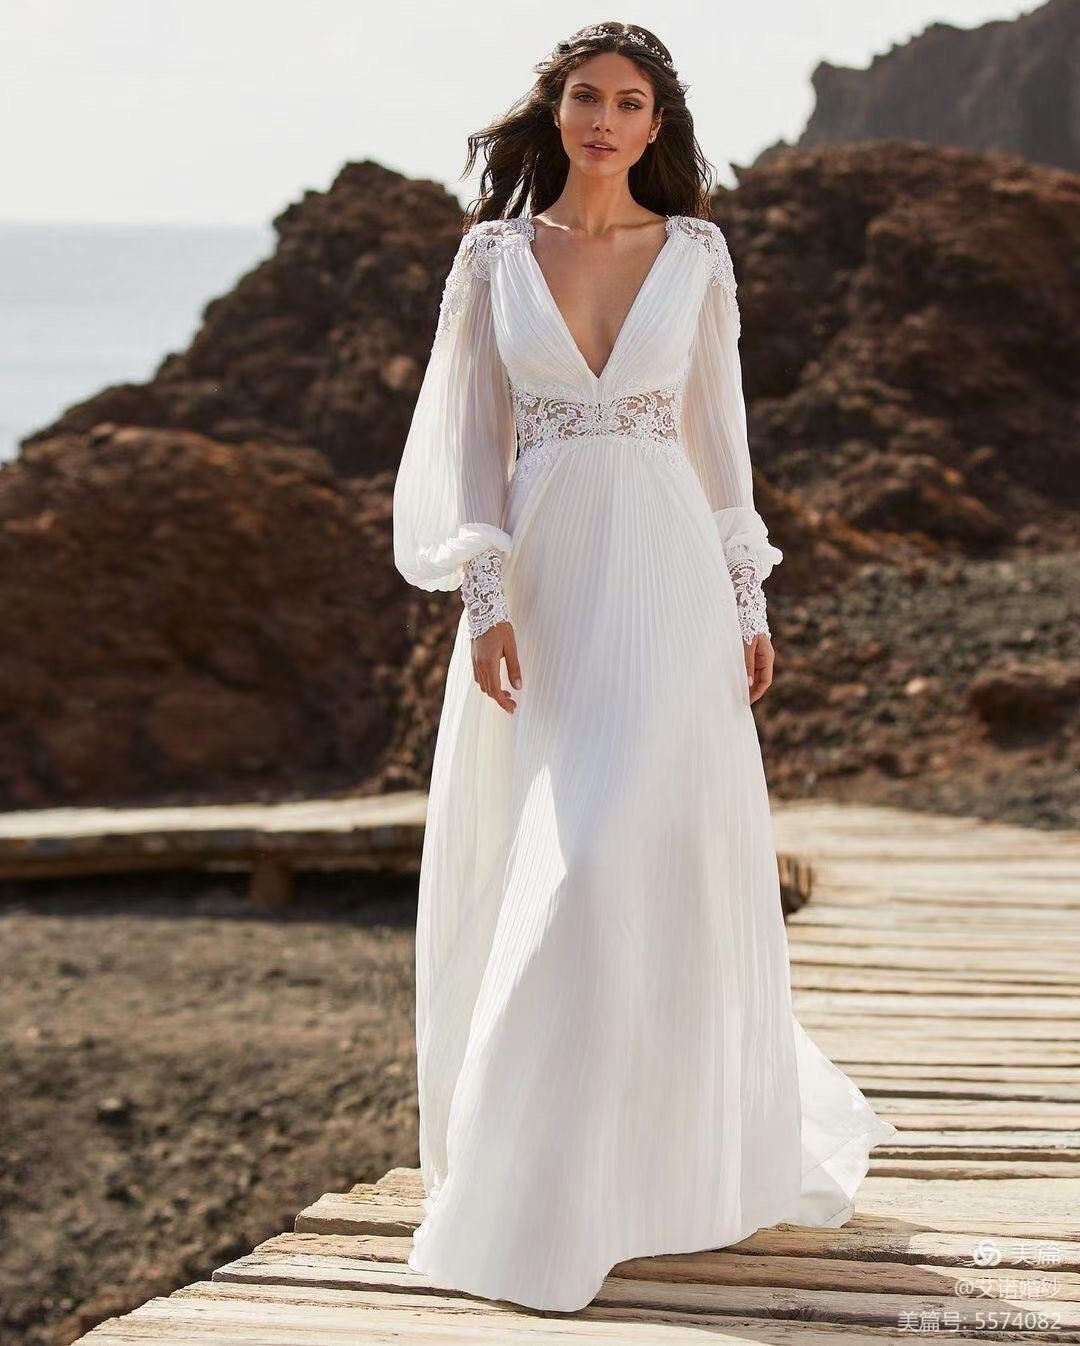 11 Puff Sleeve Wedding Dresses That Make a Serious Statement